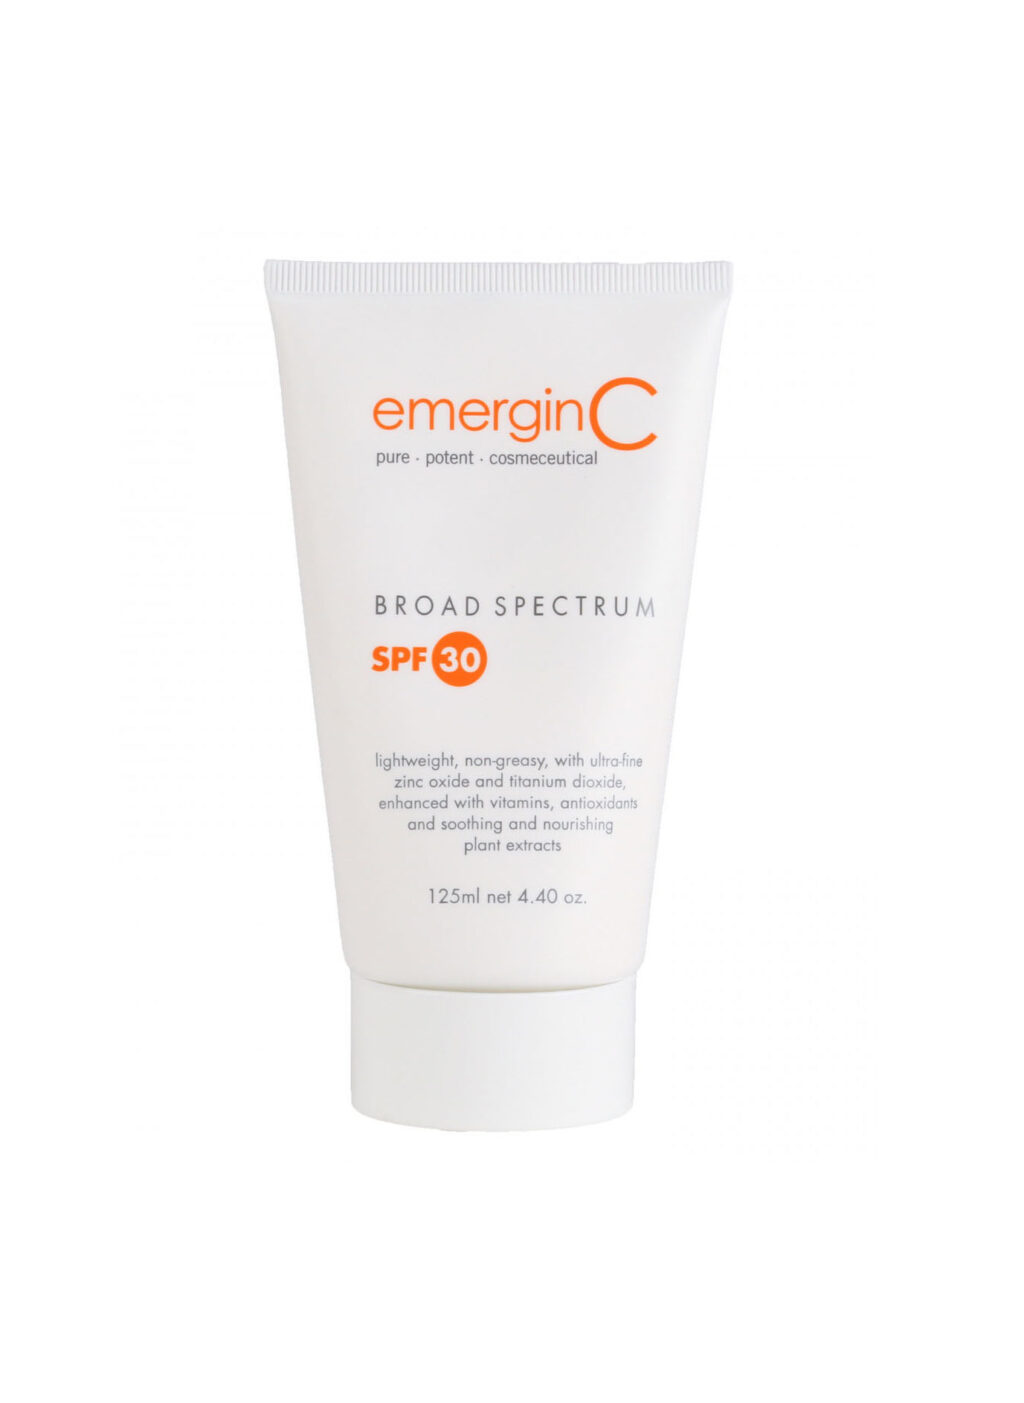 A tube of sun spf 30+ broad-spectrum sunscreen, highlighting its lightweight, non-greasy formula enriched with vitamins, antioxidants, and plant extracts, packaged in a 125 ml/4.40 oz container.